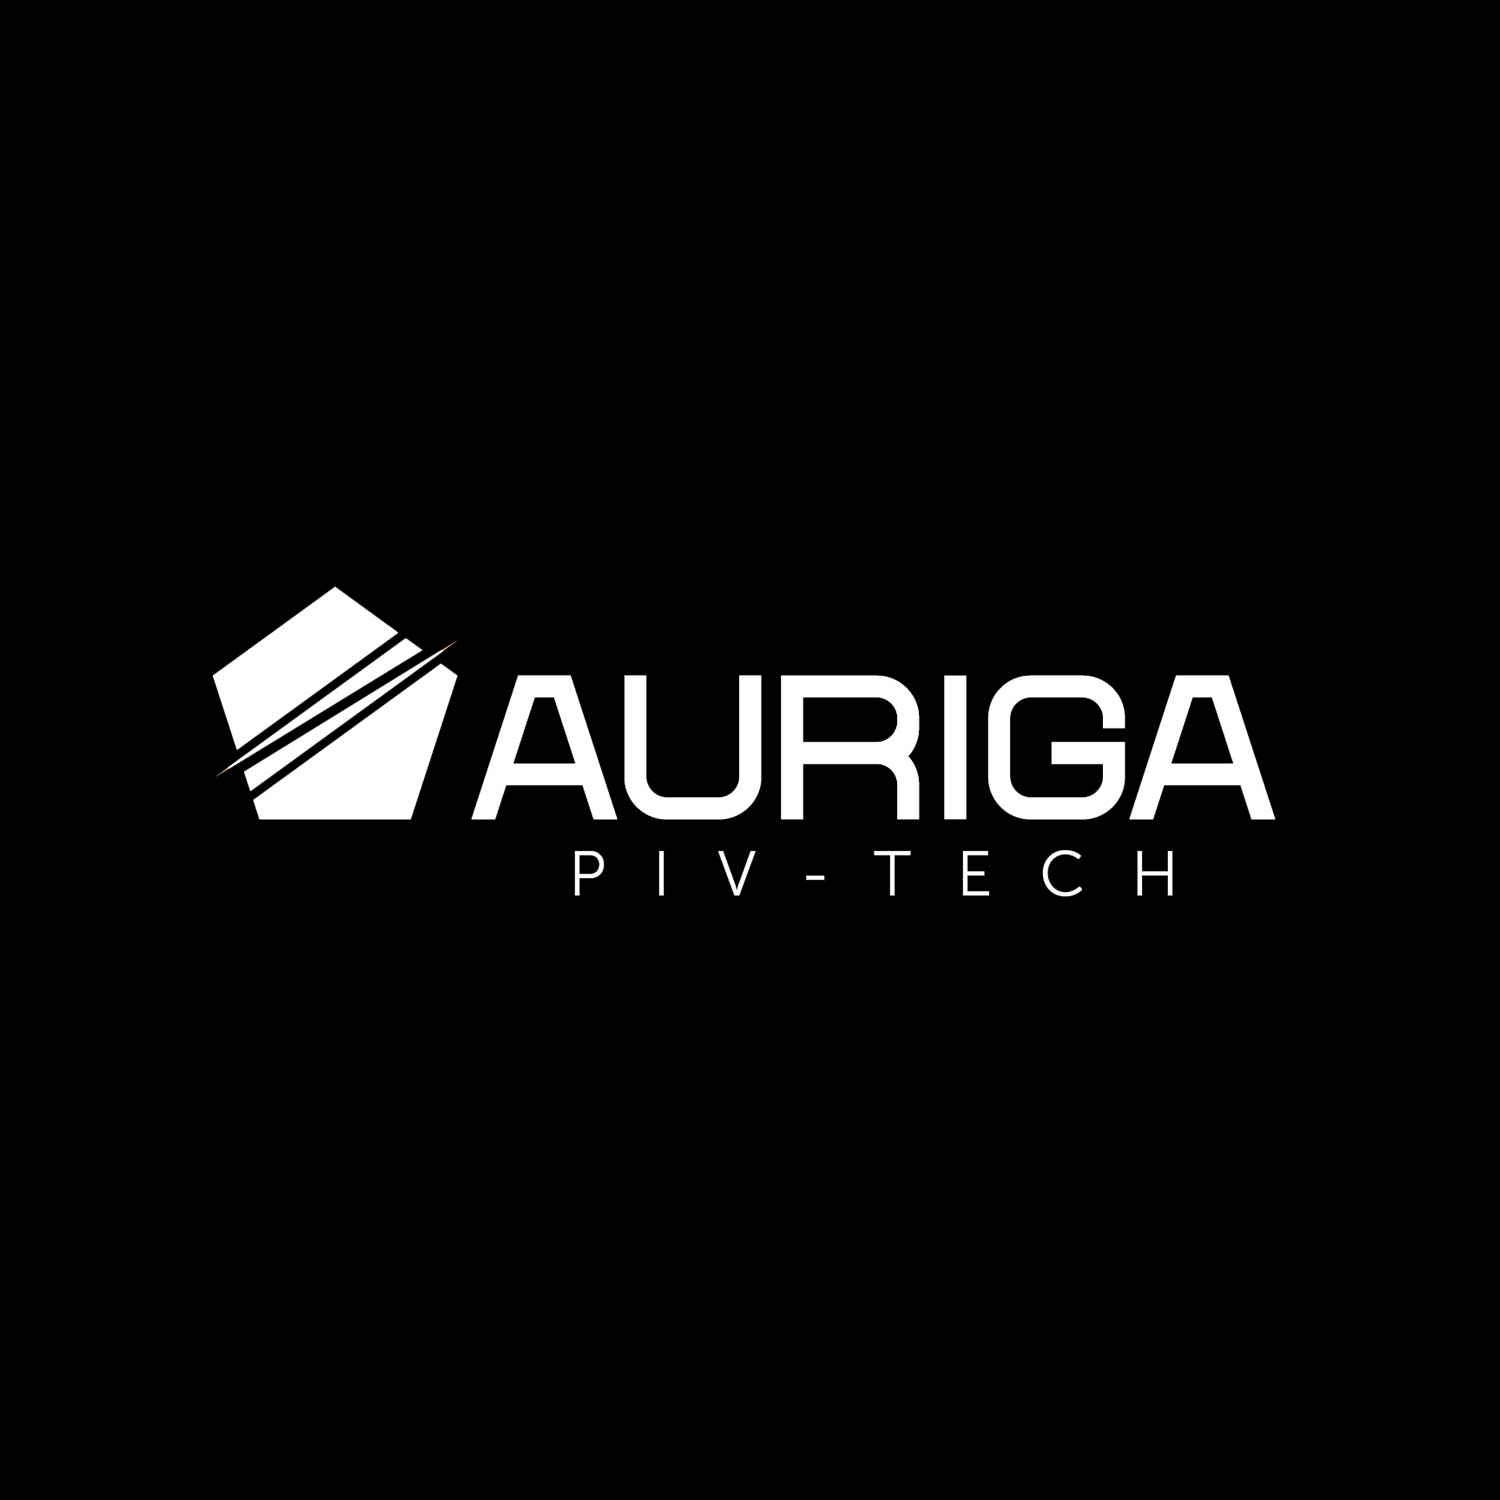 ABOUT-US-AURIGA-INVERTED